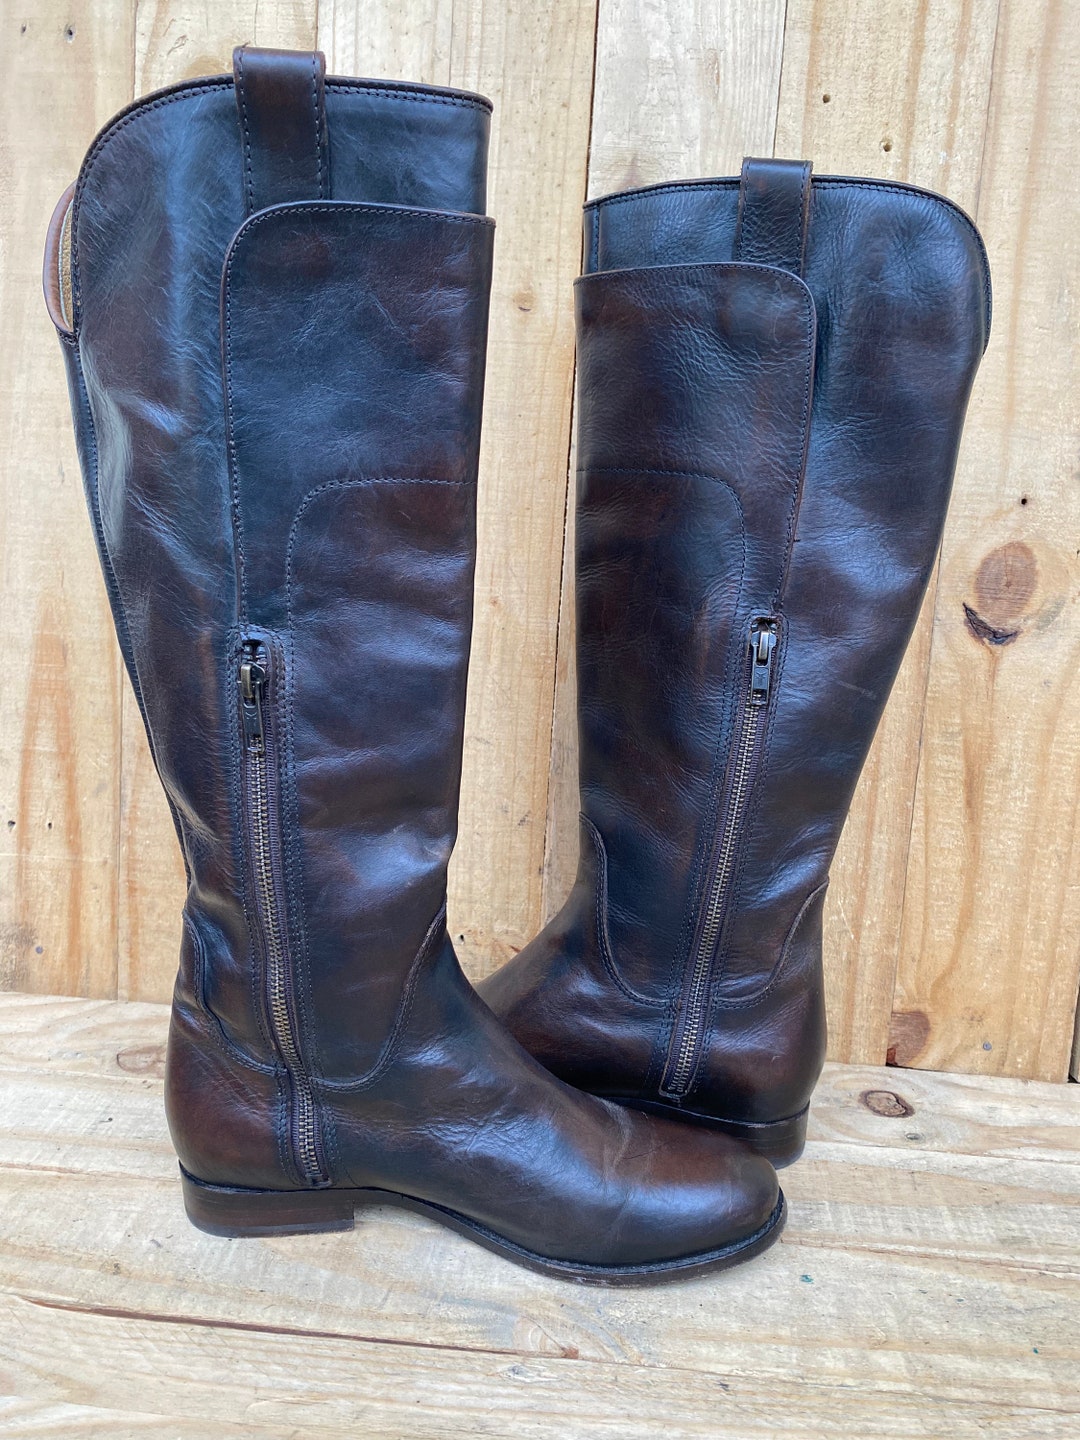 FRYE Brown Distressed Paige Tall Leather Riding Boots Sz 7 B - Etsy